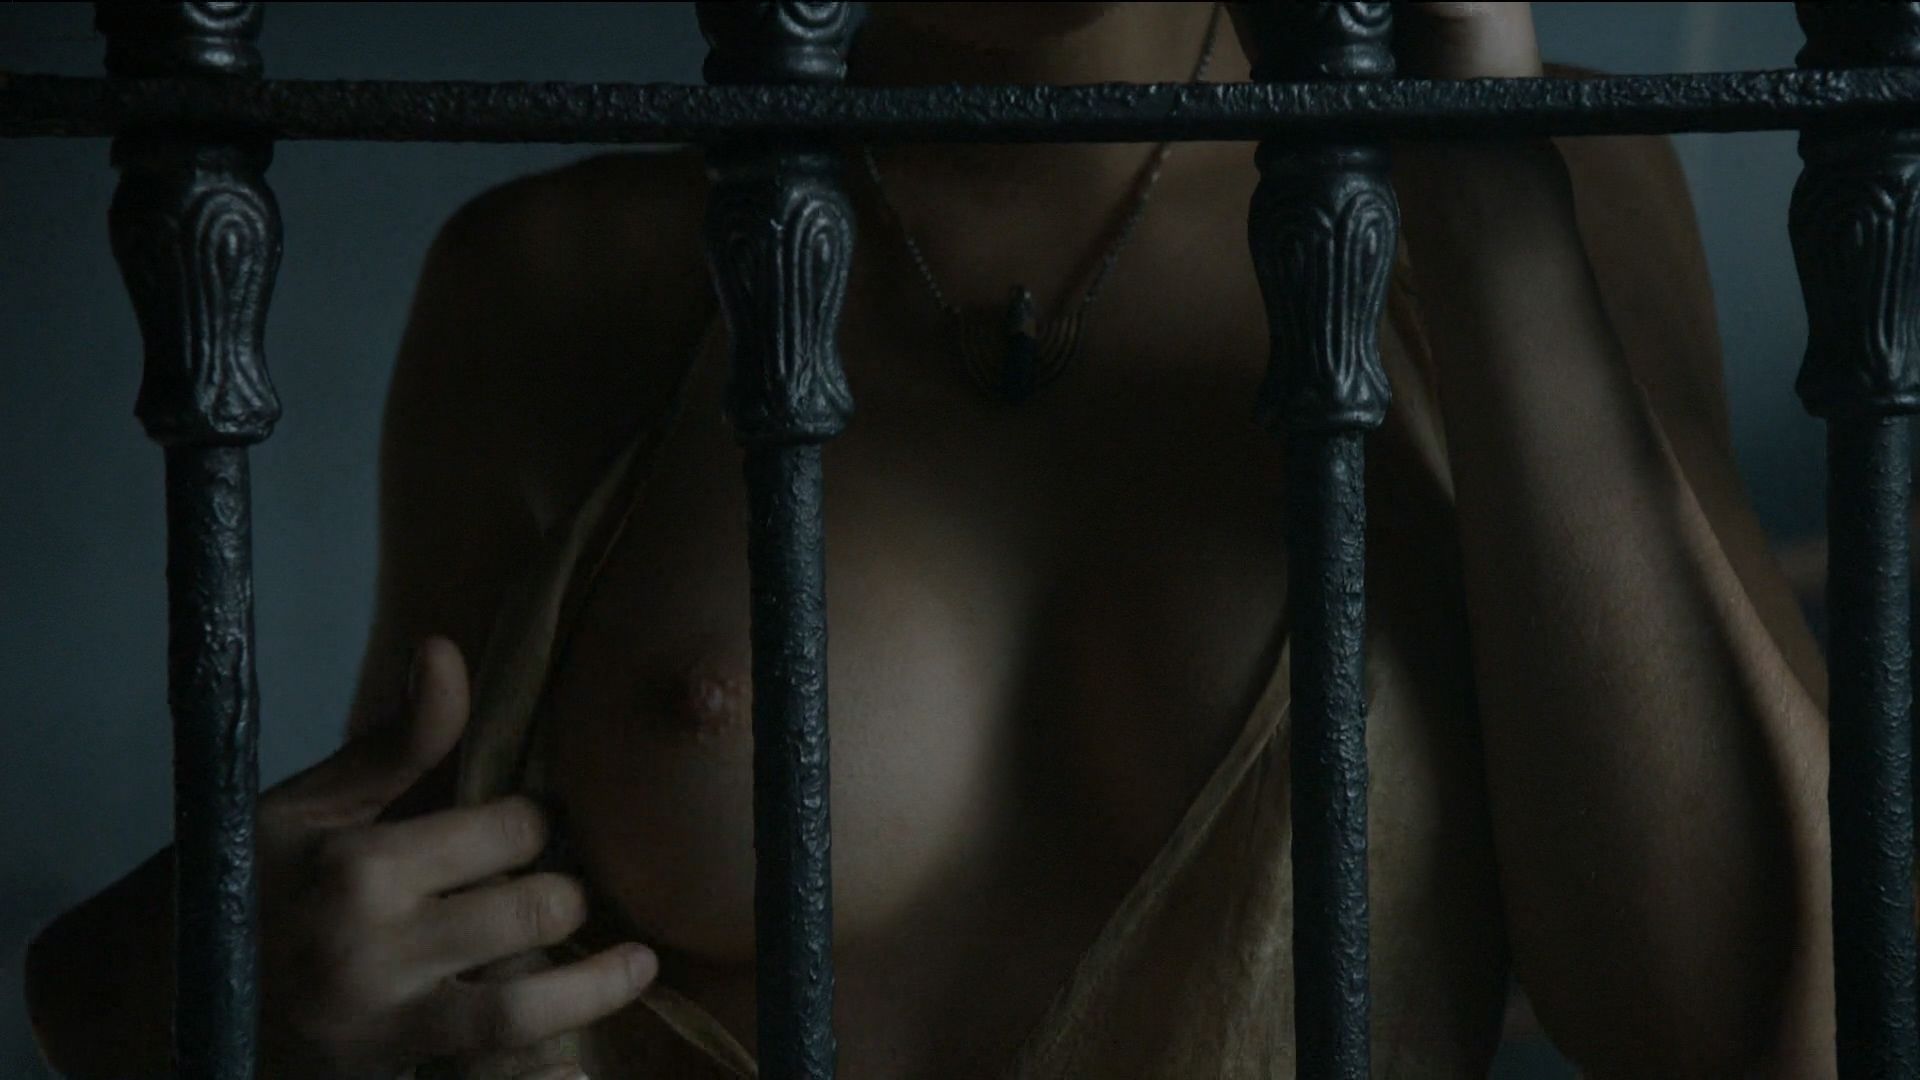 Rosabell Laurenti Sellers Nude – Game of Thrones (2015) s05e07 – HD 1080p